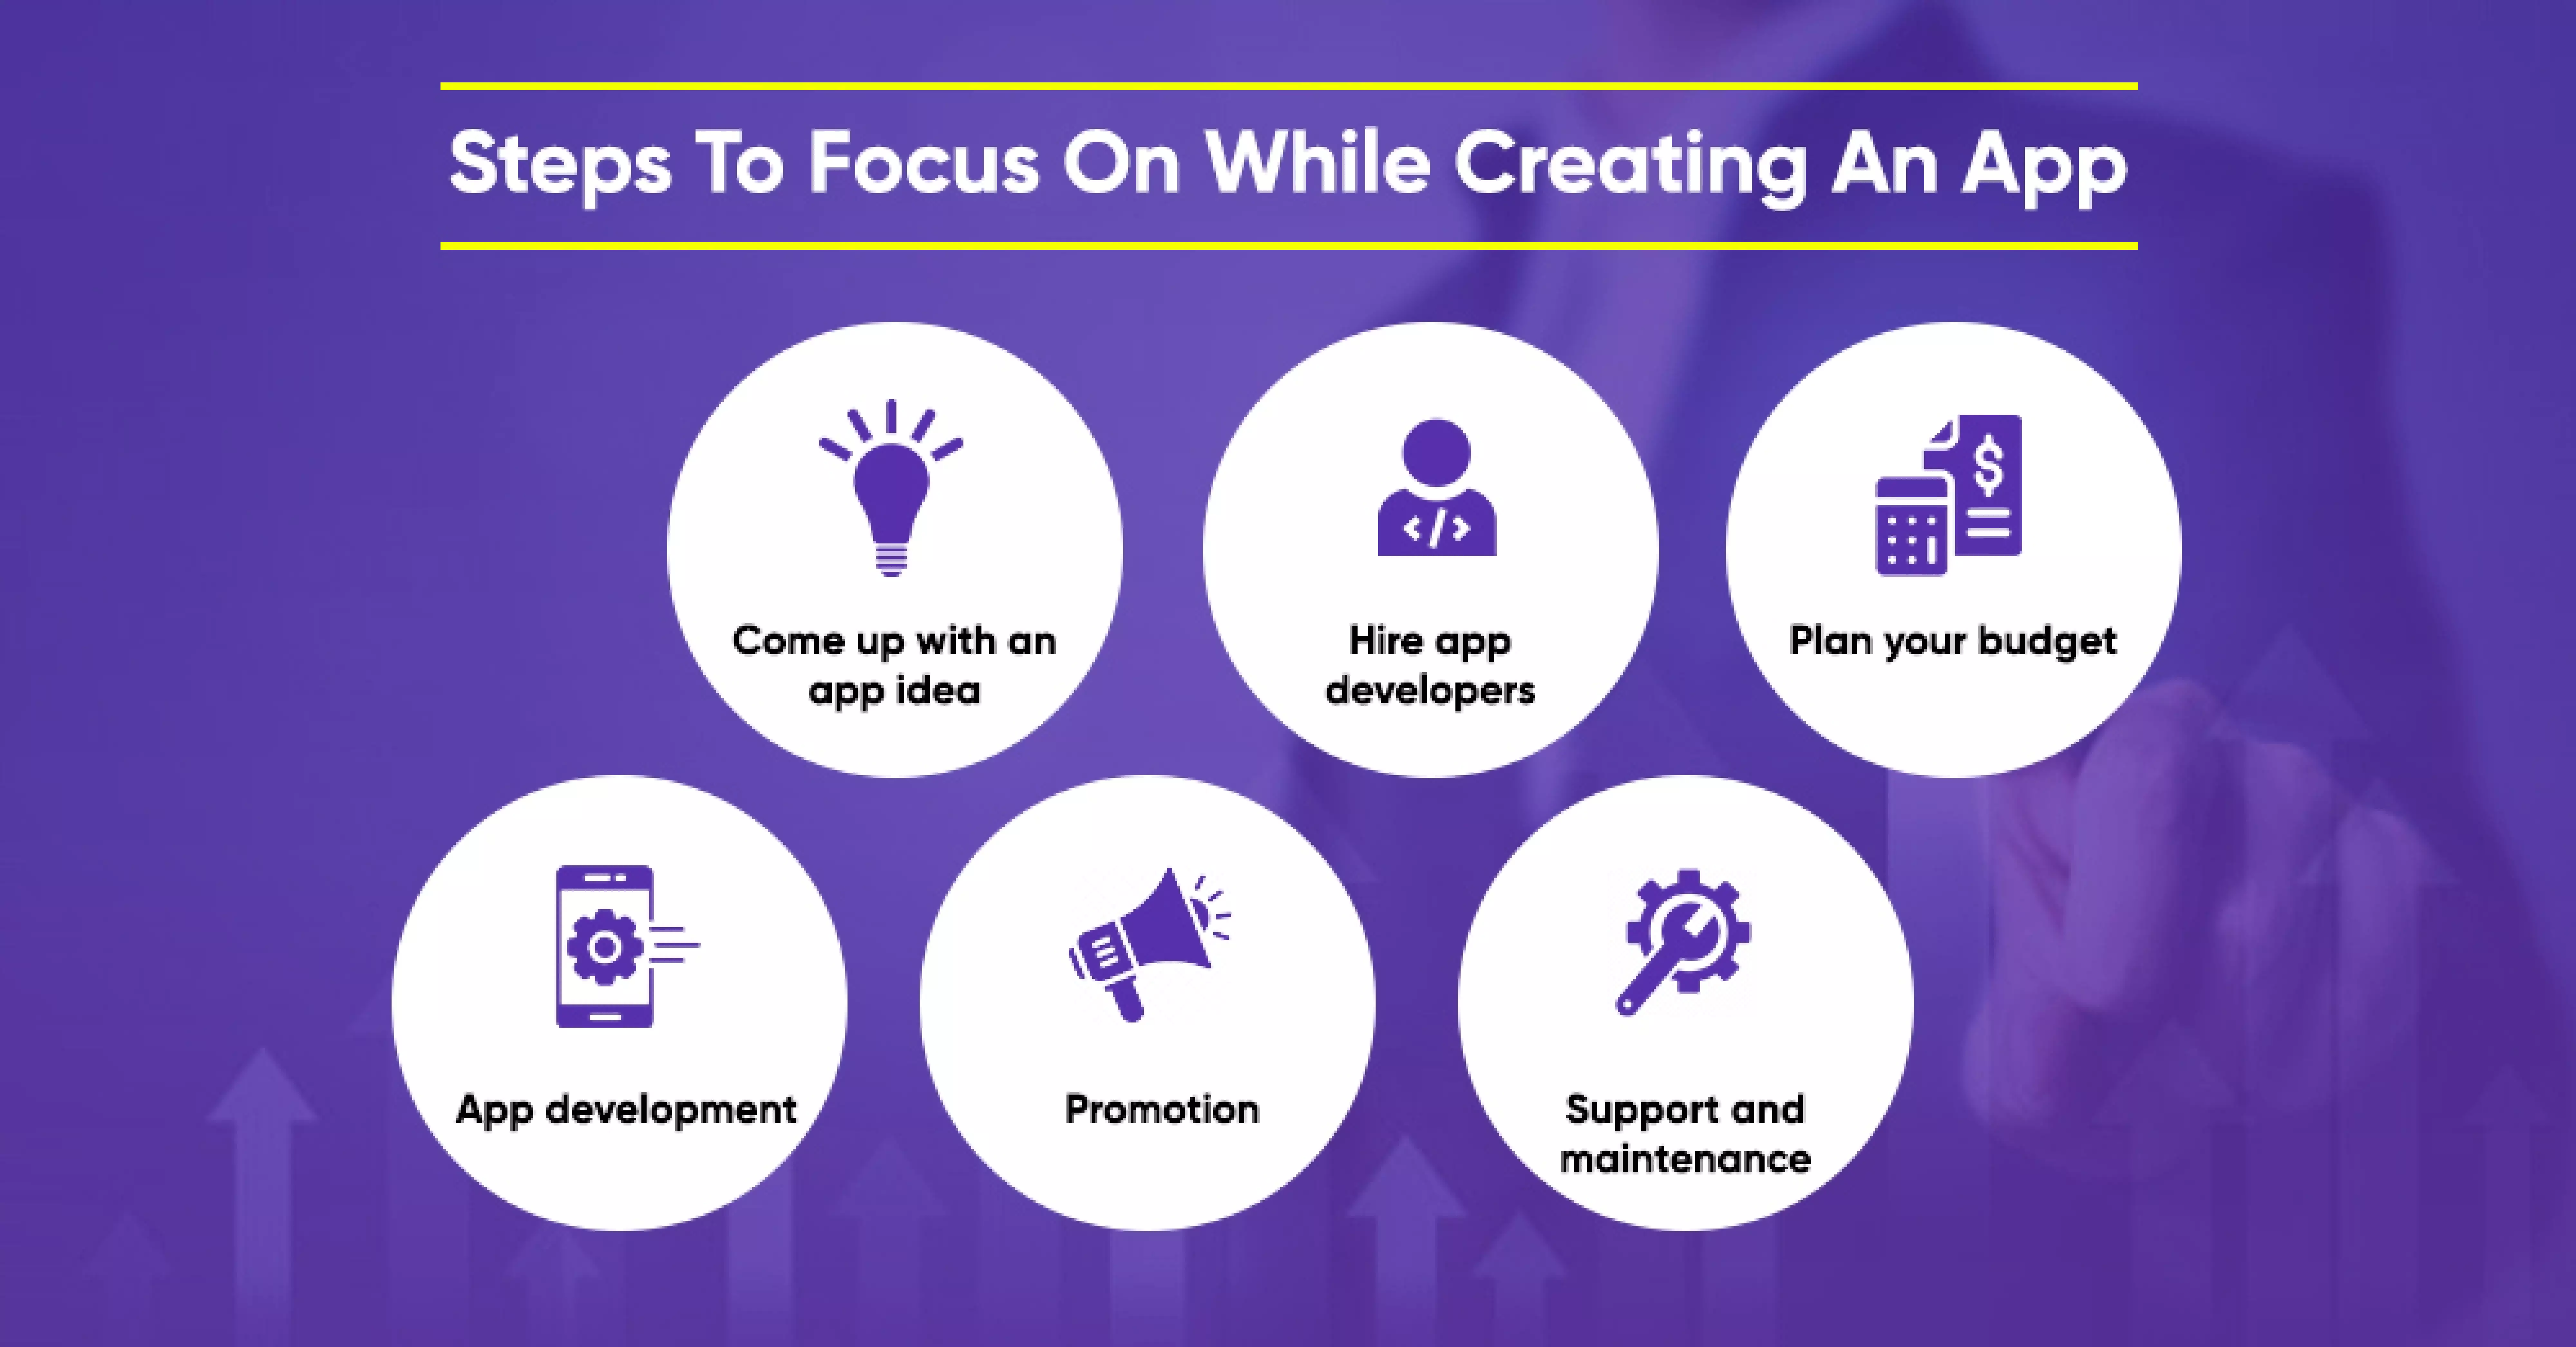 Steps To Focus On While Creating An App